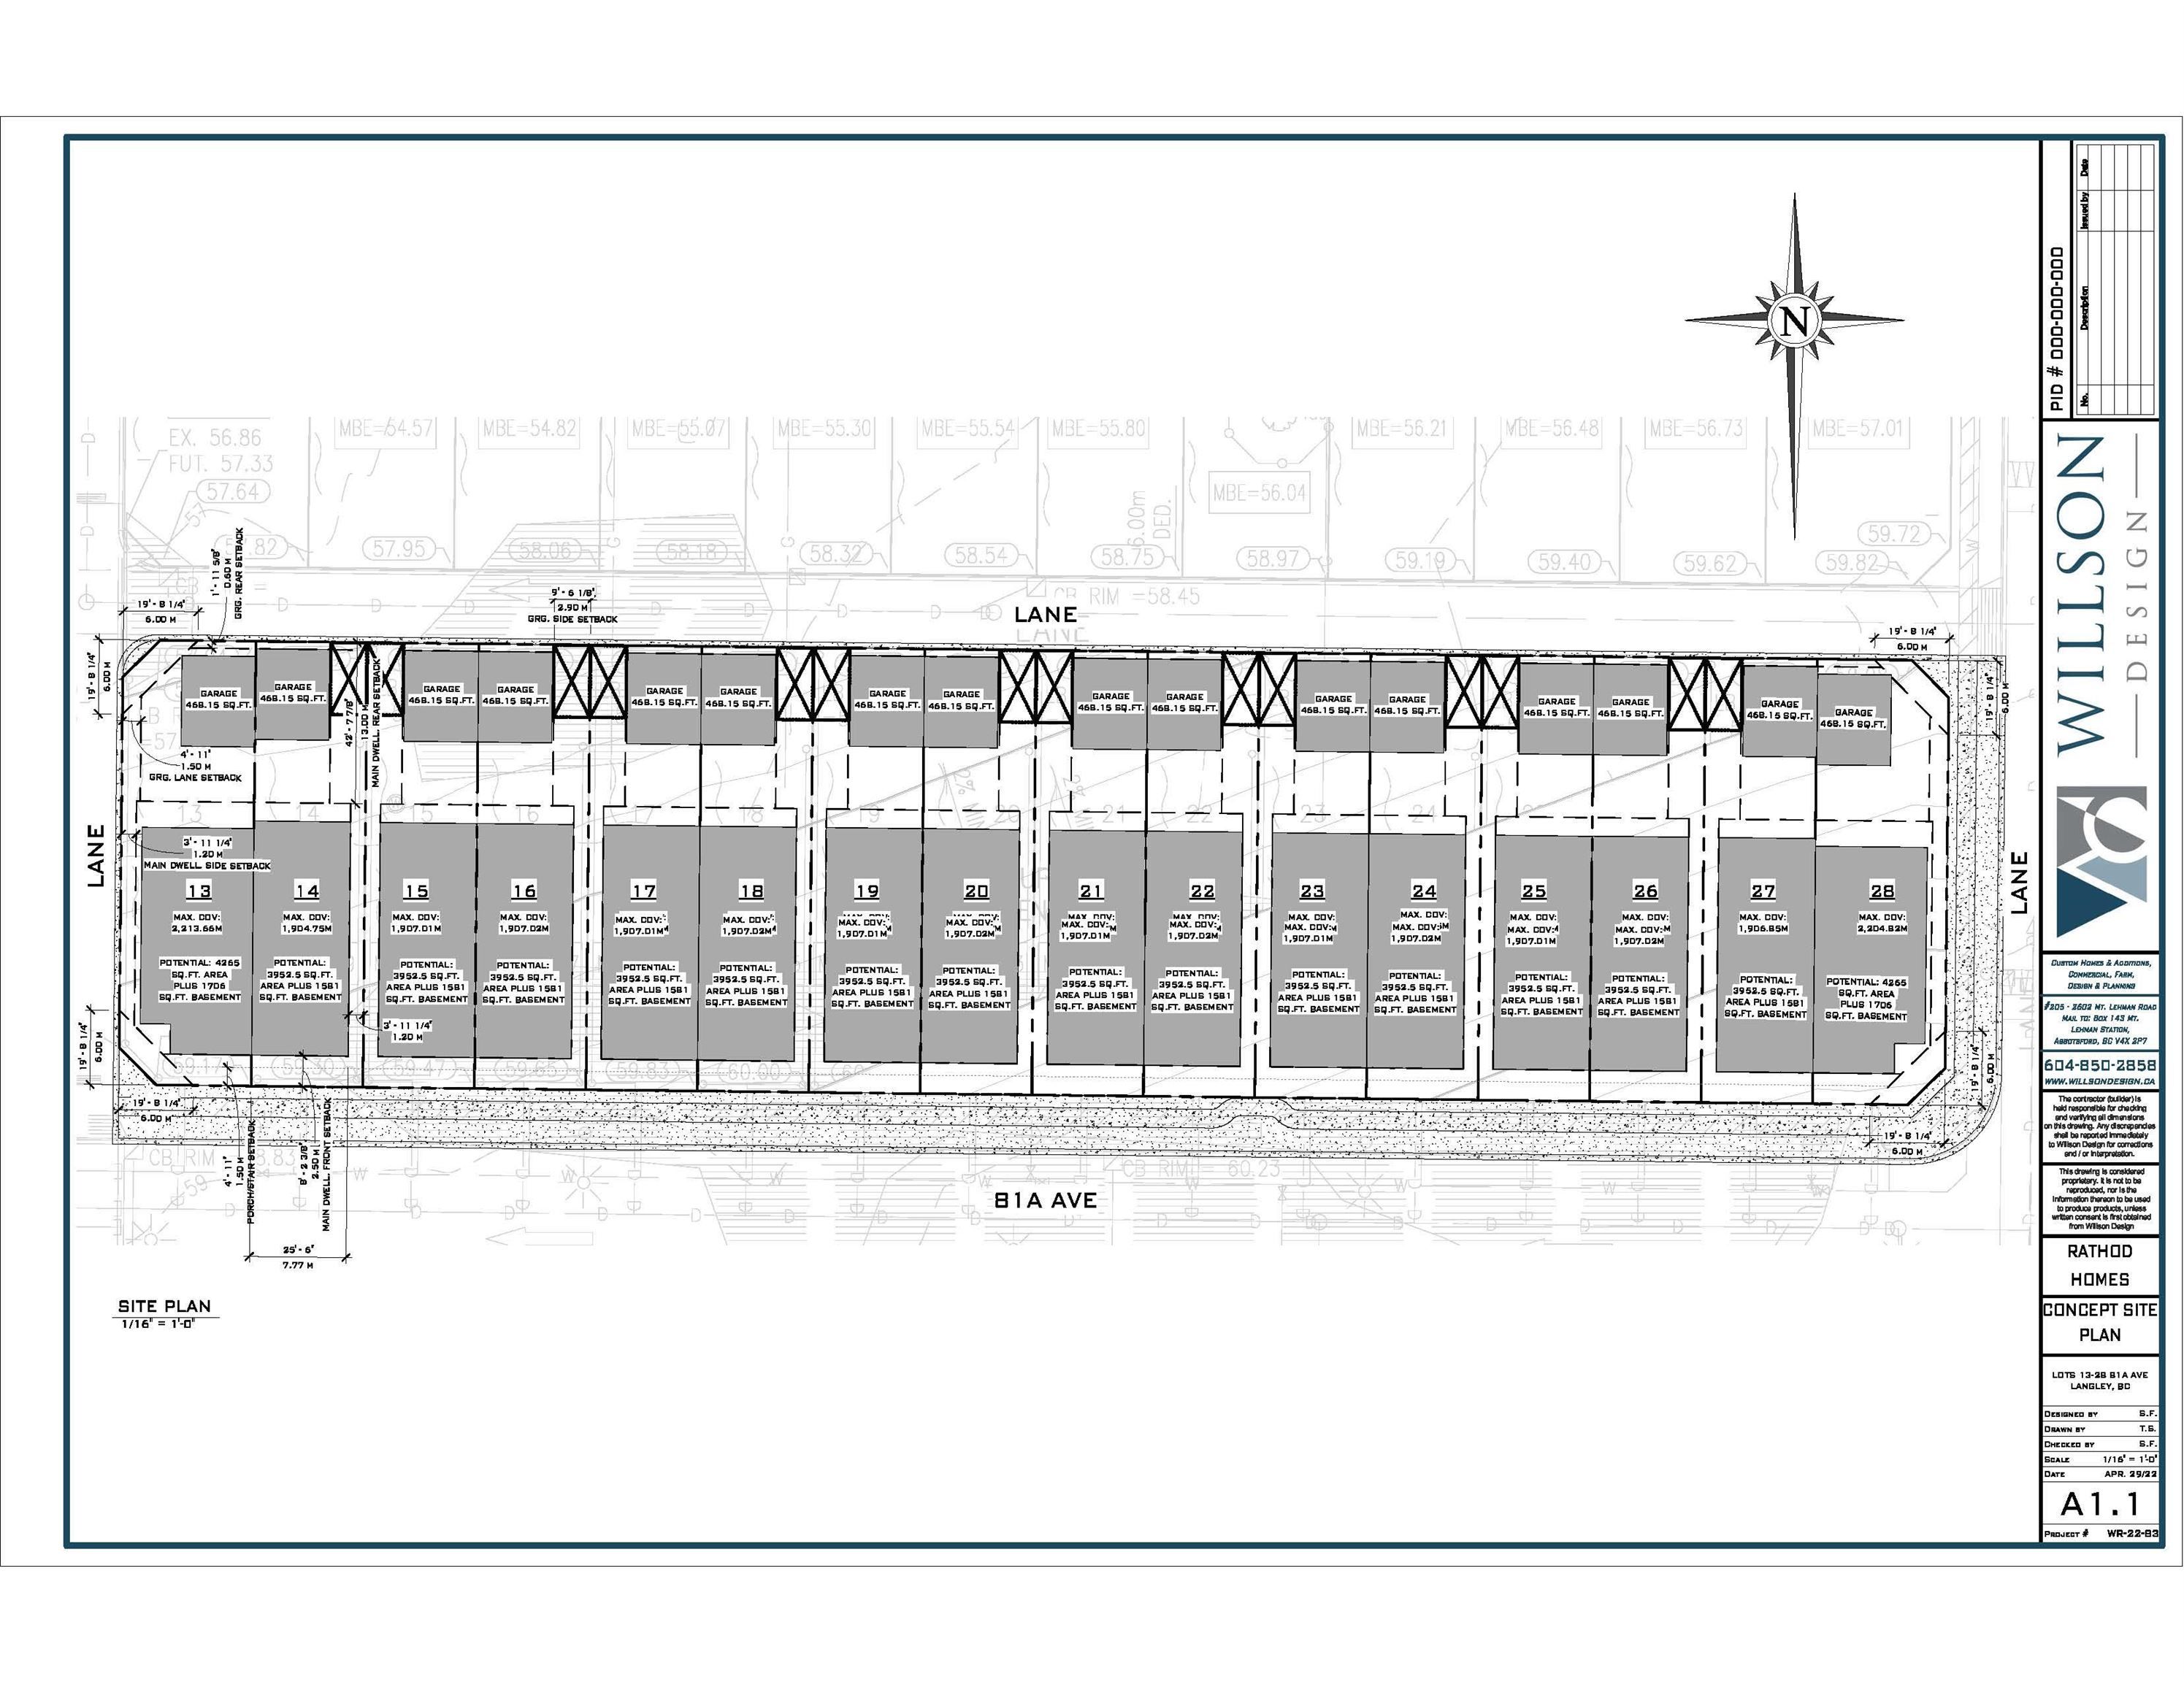 Site Plan with lot numbers